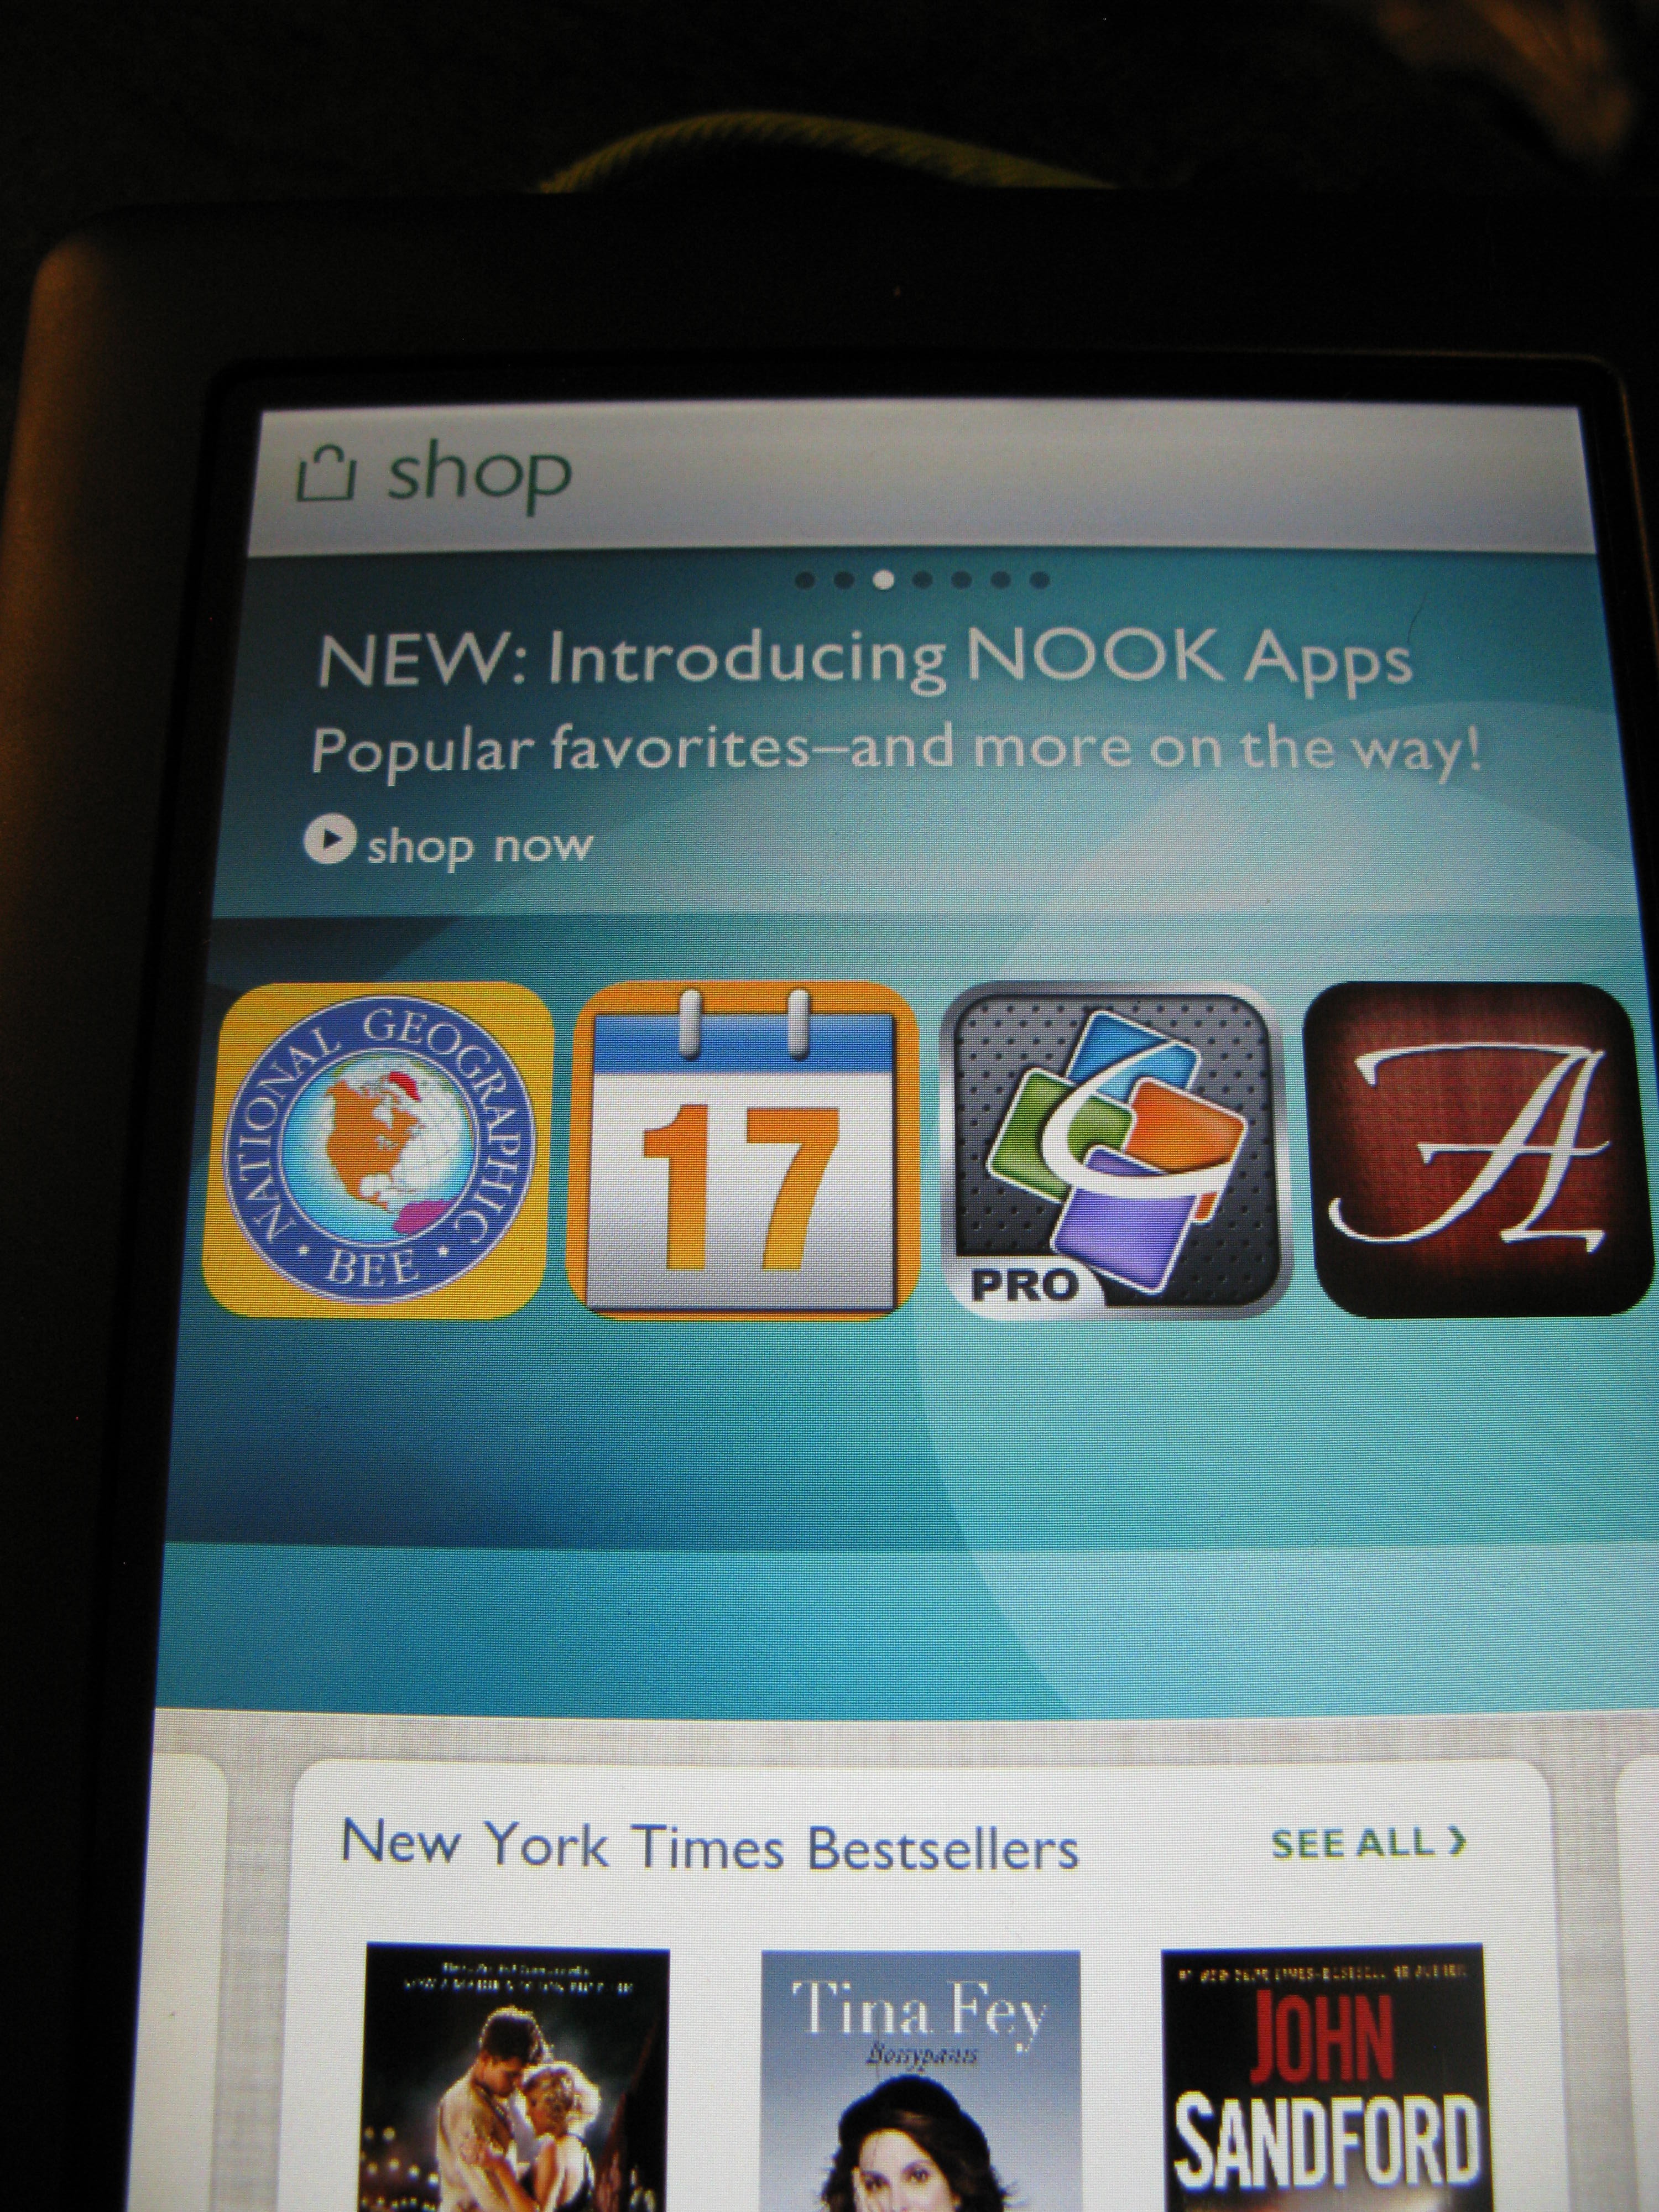 B&N NOOKcolor Software Update and App Store Review